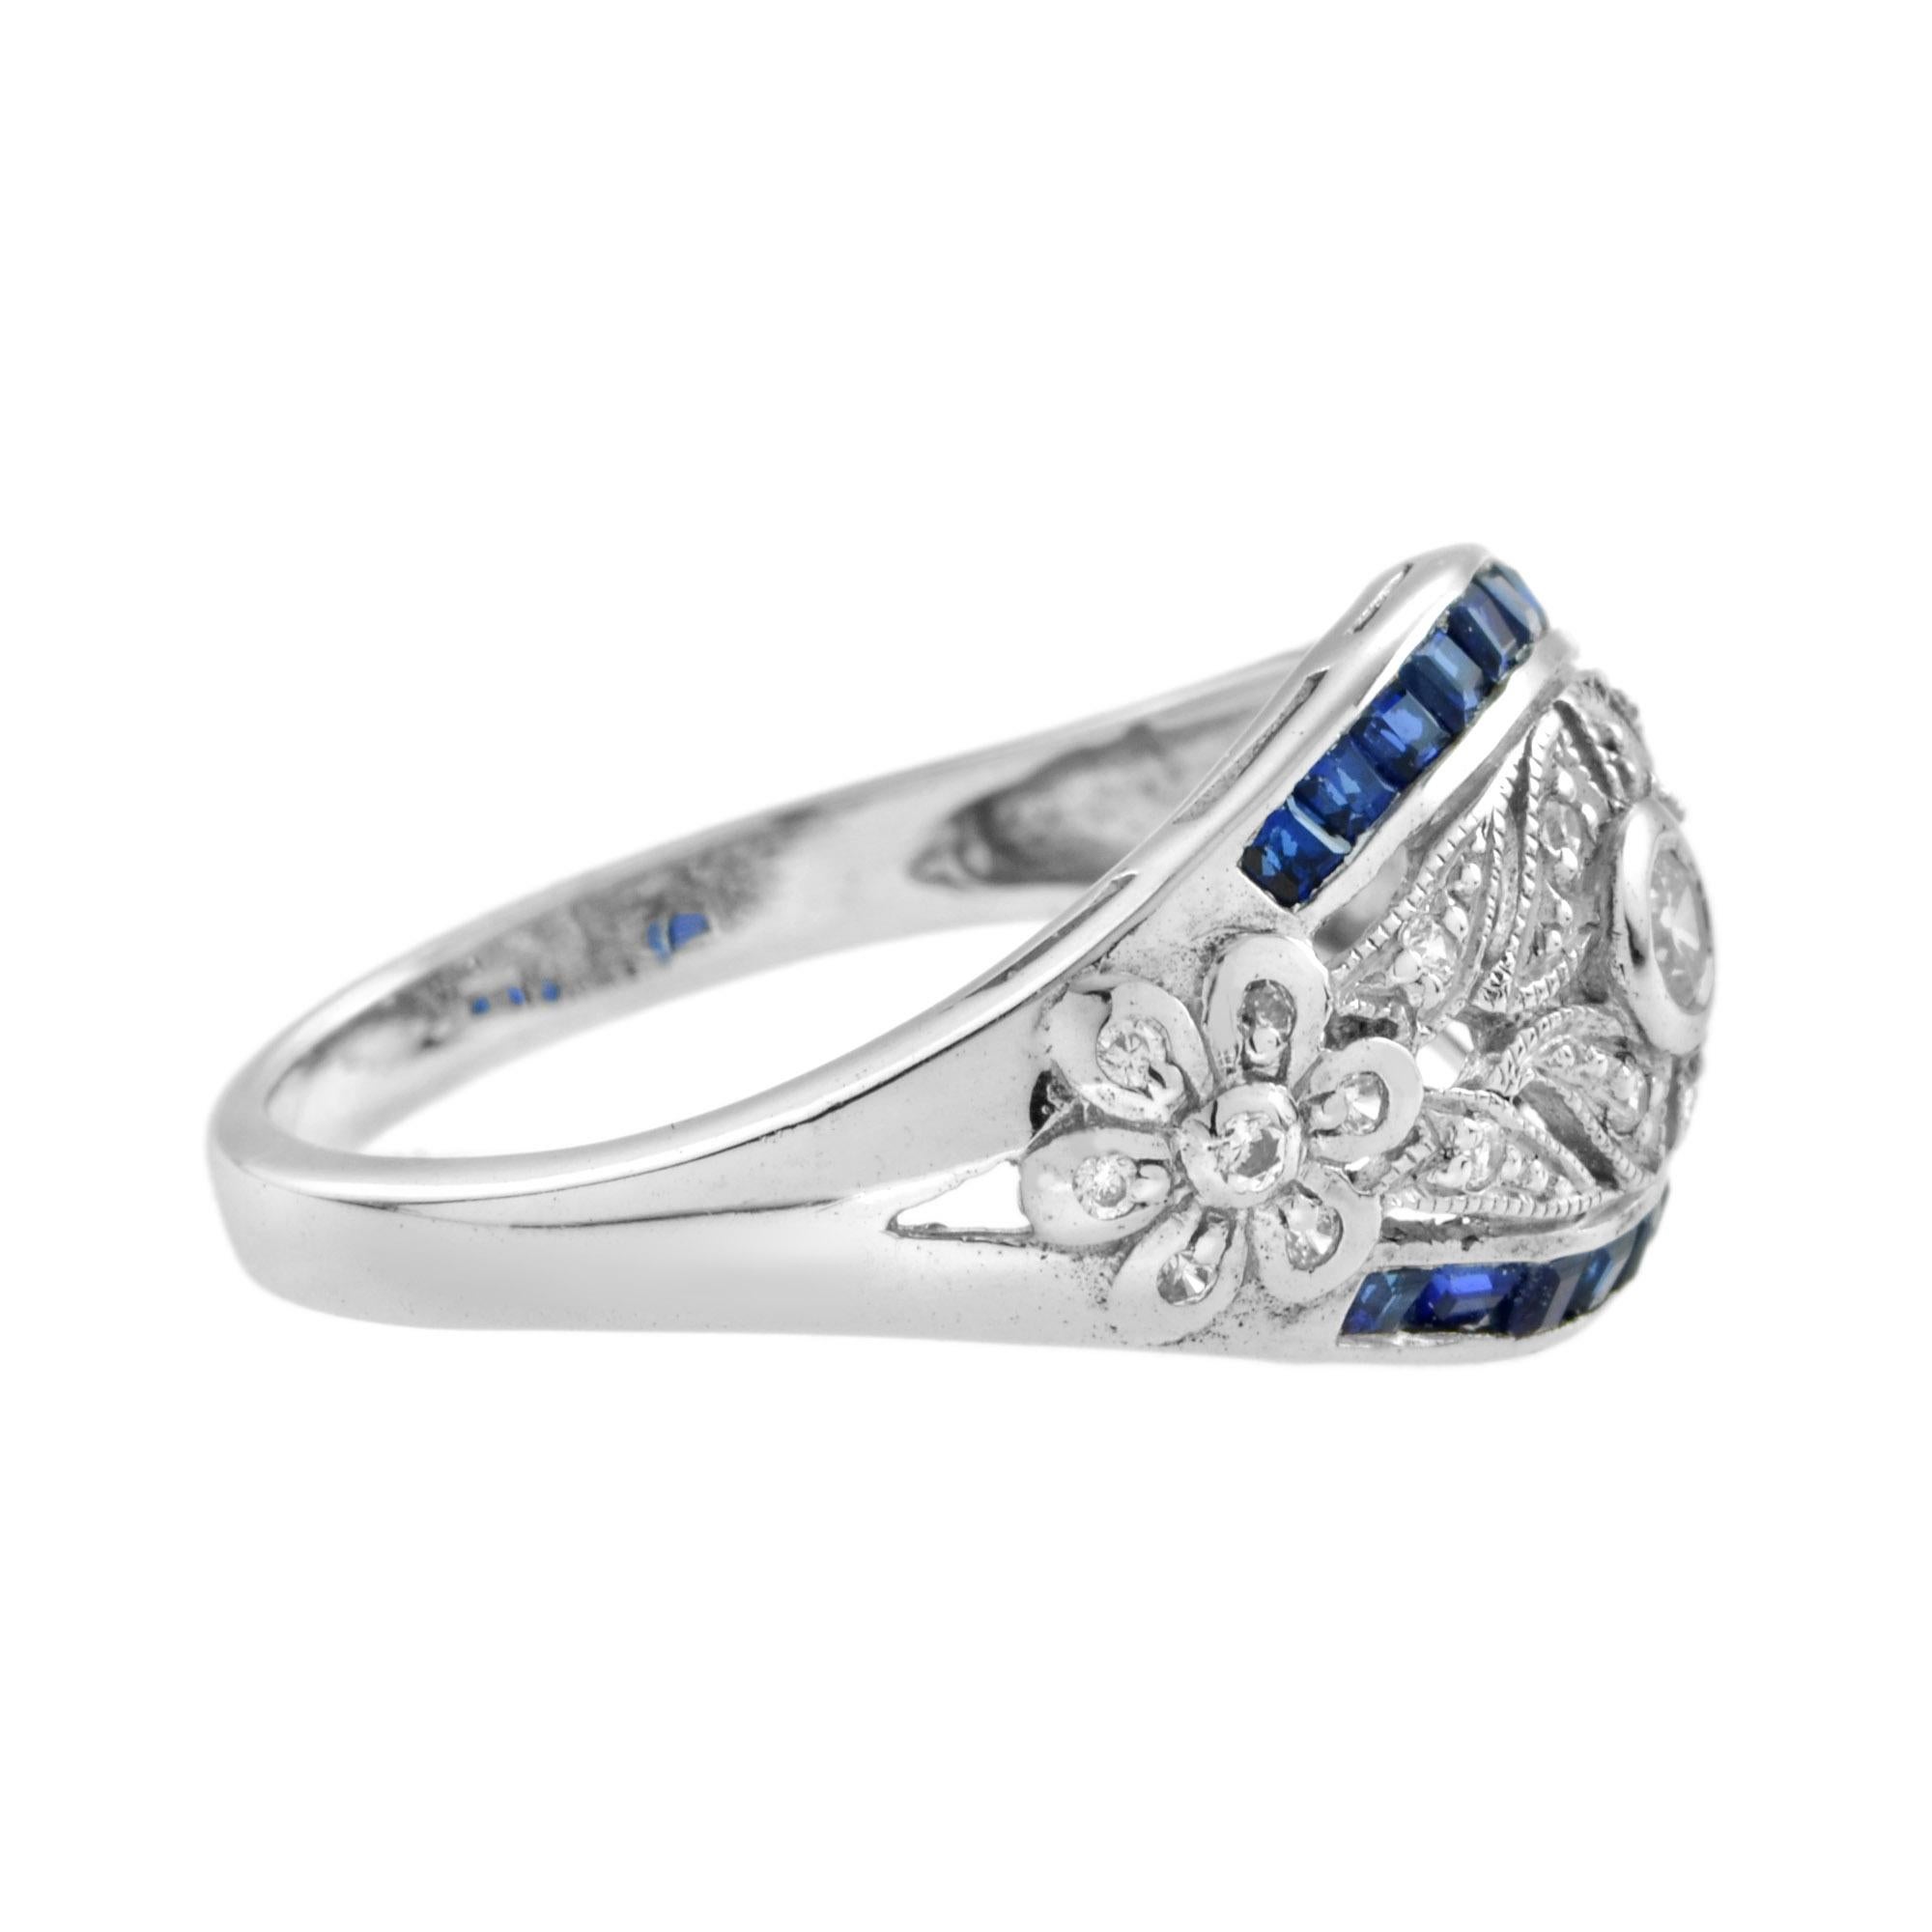 For Sale:  Art Deco Style Diamond and Sapphire Ring in 14K White Gold 3